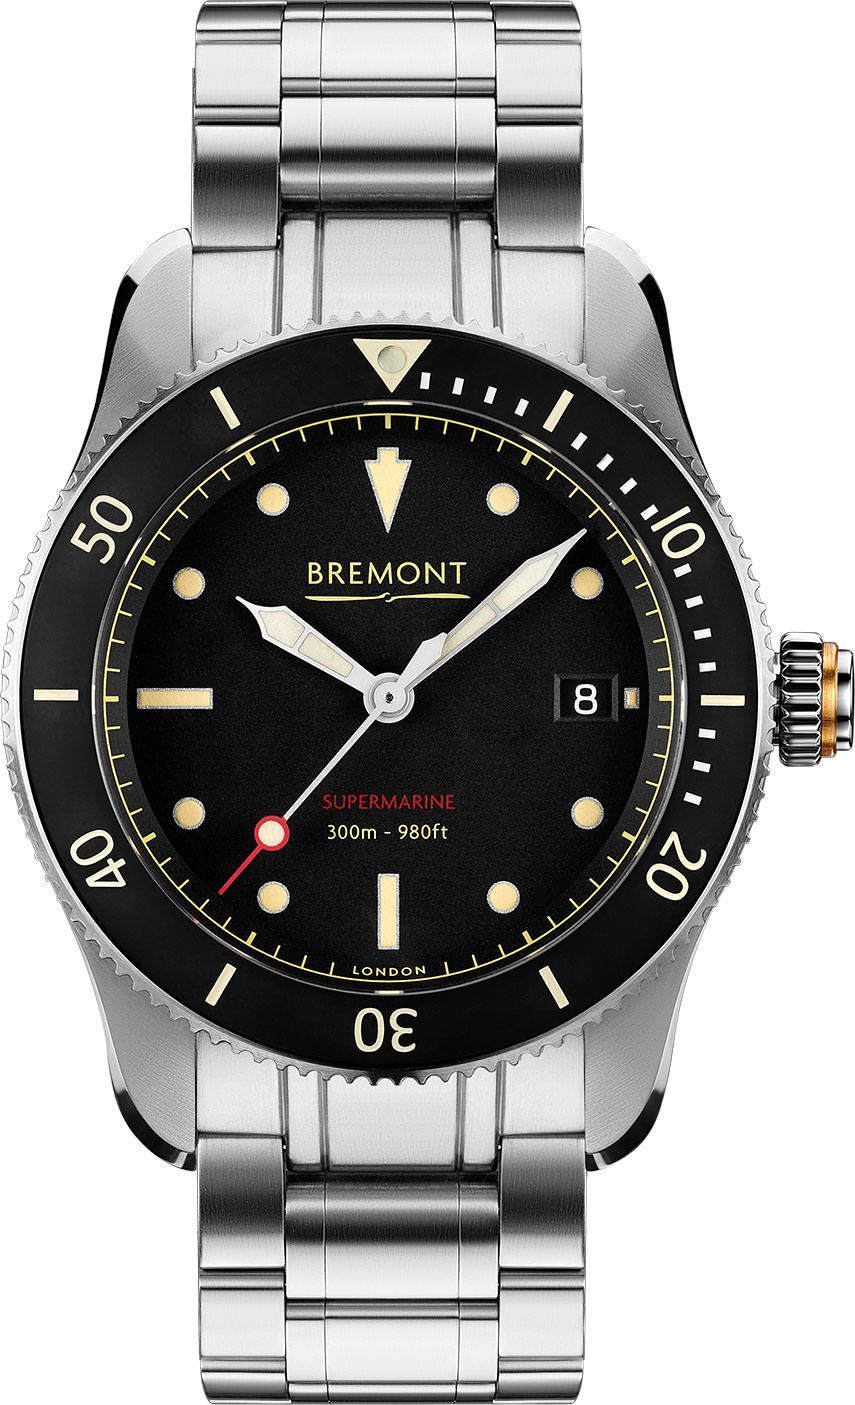 Bremont Supermarine S300 Black Dial 40 mm Automatic Watch For Men - 1